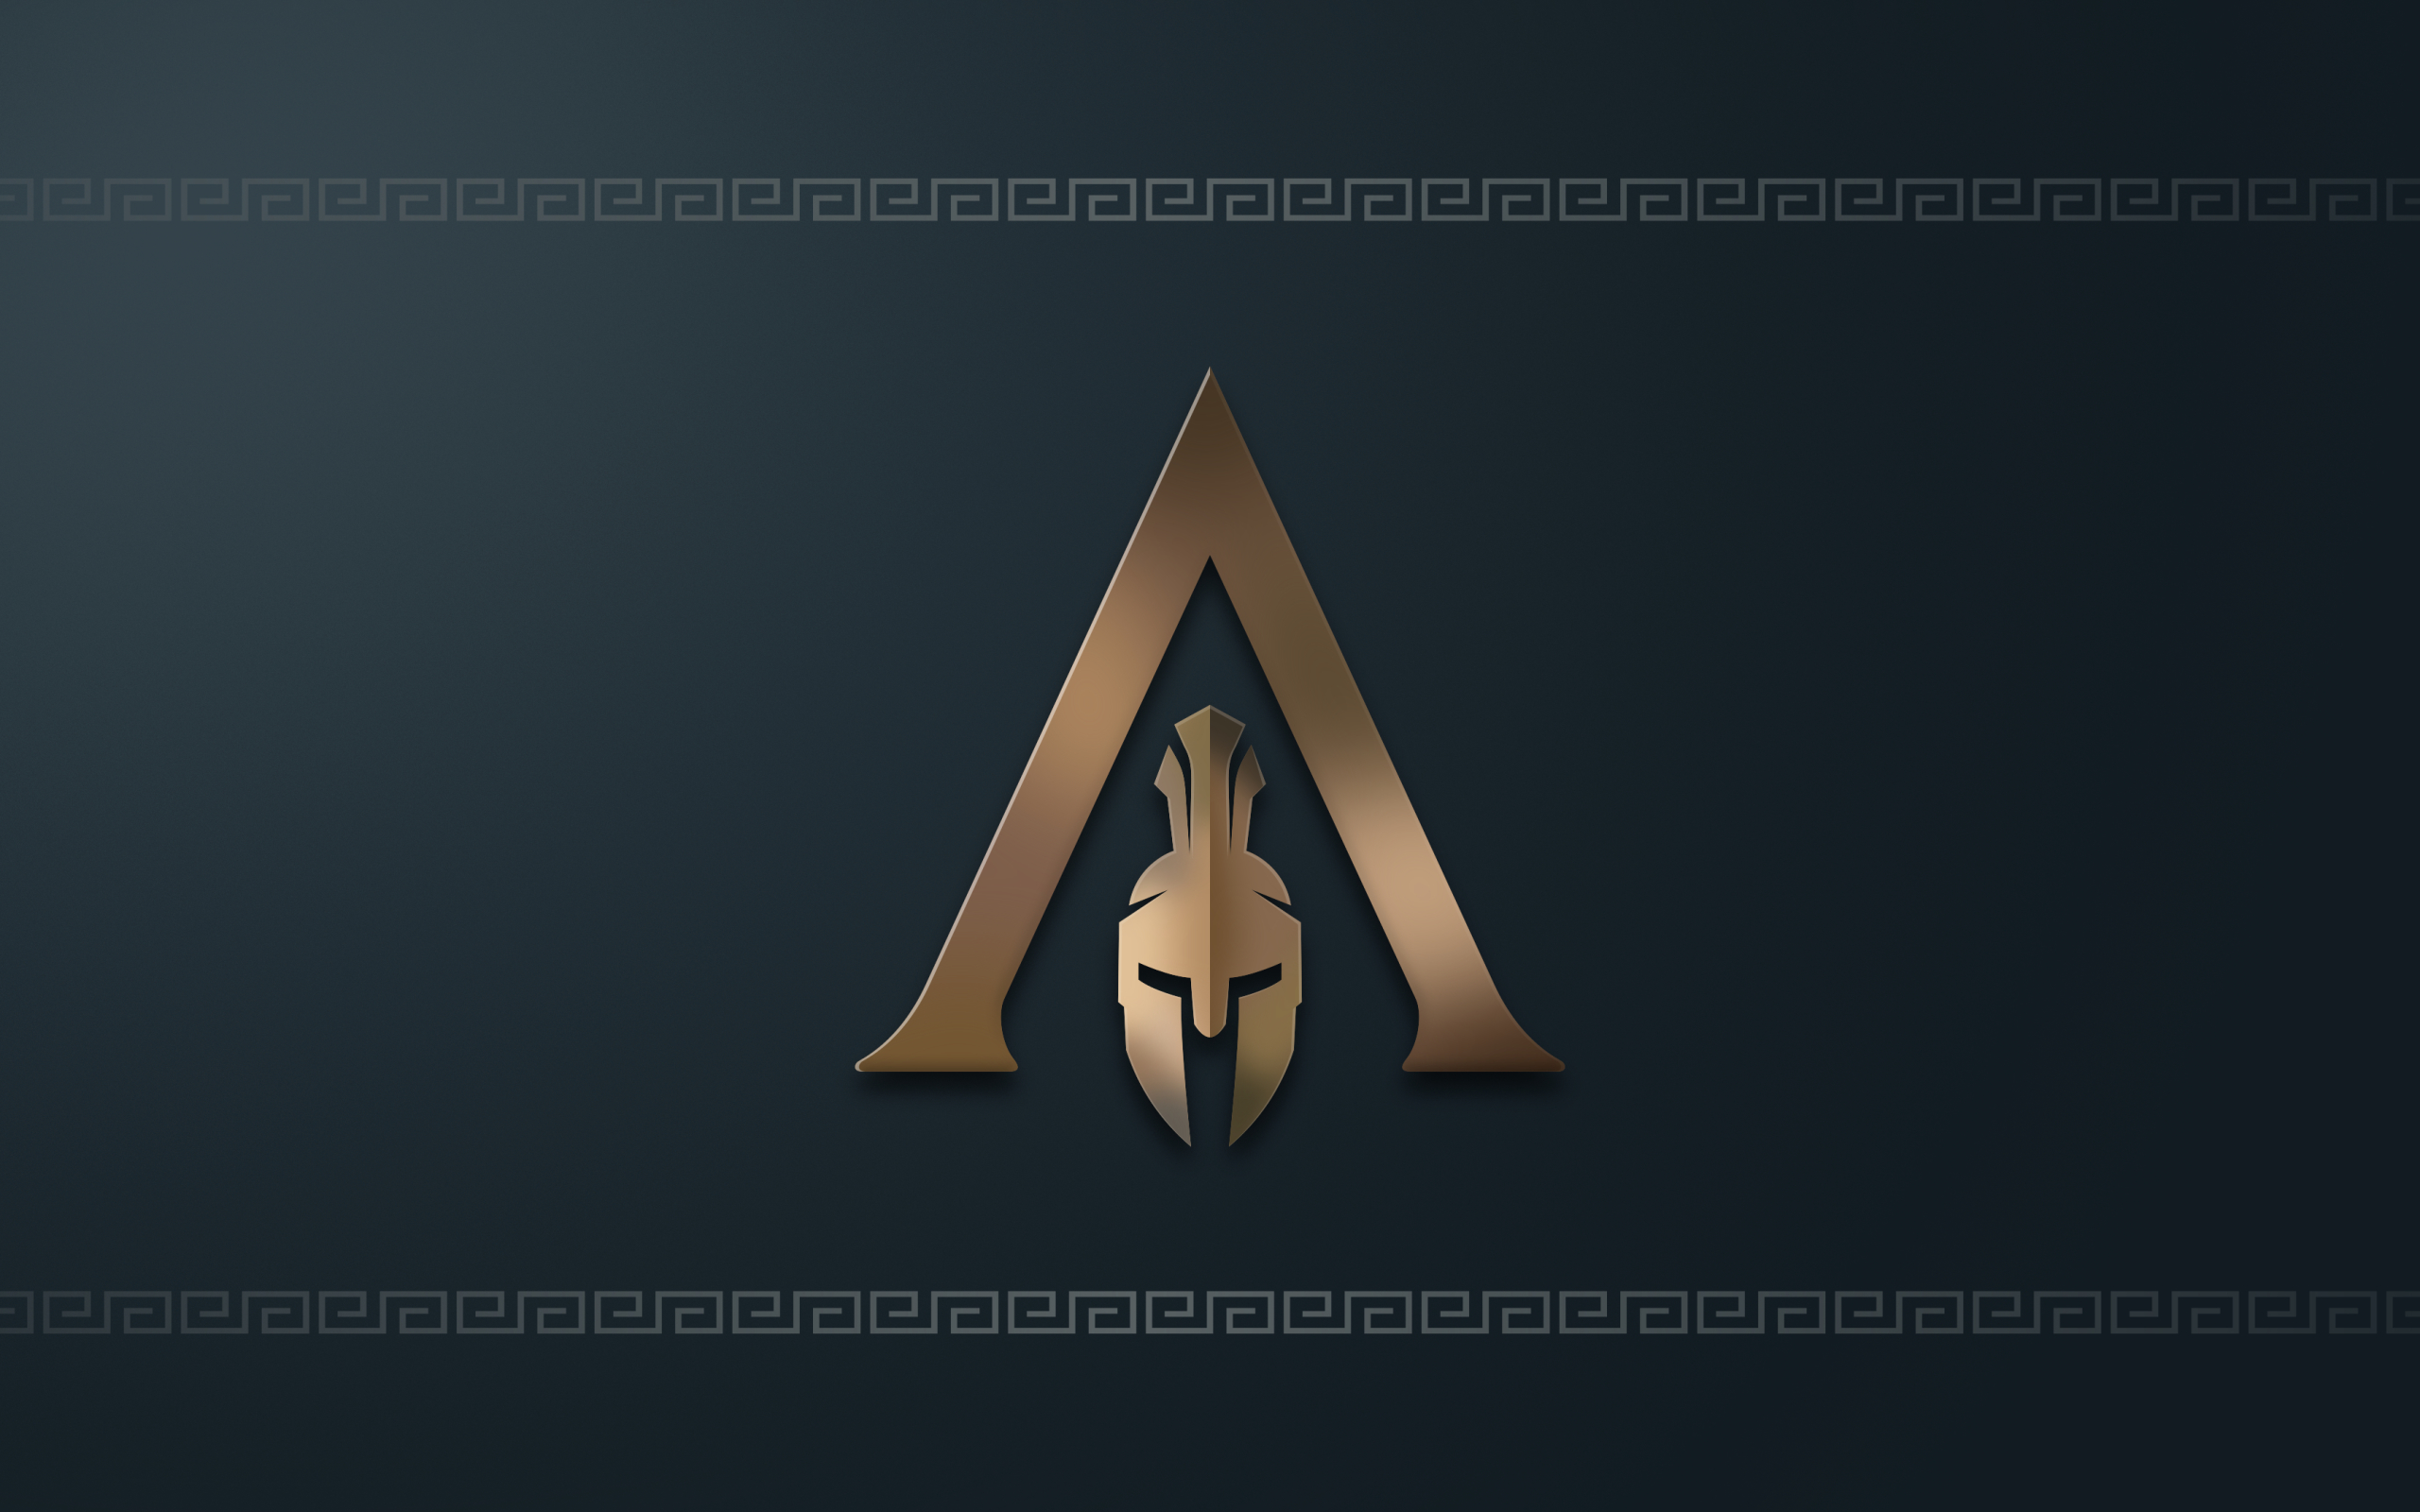 Wallpaper Of Video Game, Assassin S Creed, Odyssey, - Assassin's Creed Odyssey Symbol - HD Wallpaper 